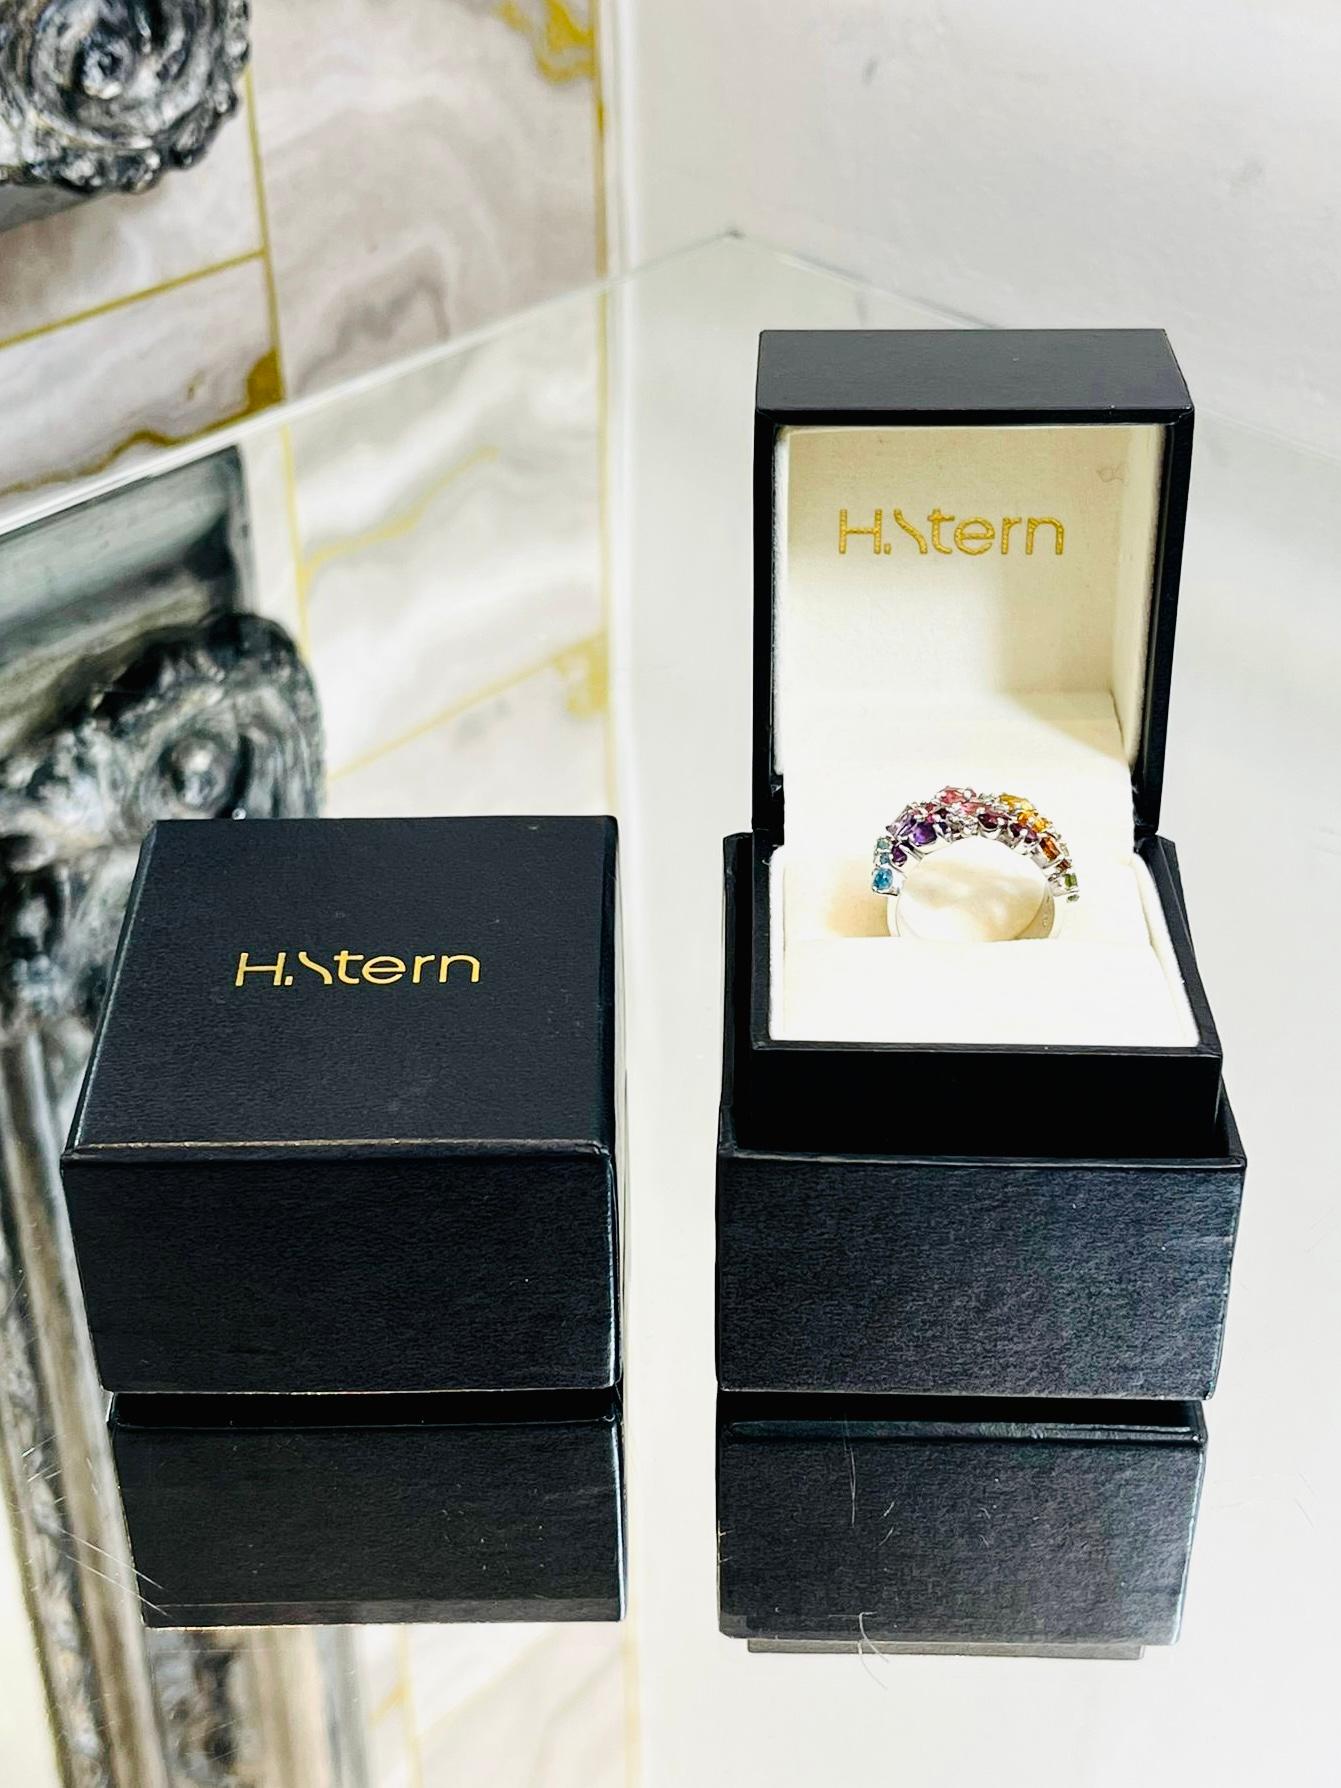 H Stern Rainbow Gemstone Ring In 18k White Gold 

Multi-coloured gemstones and diamonds, claw set in an array of 

different stone cuts and shapes on a white gold band.

Size - 54EU

Condition - Very Good (Light scratches to the shank)

Composition